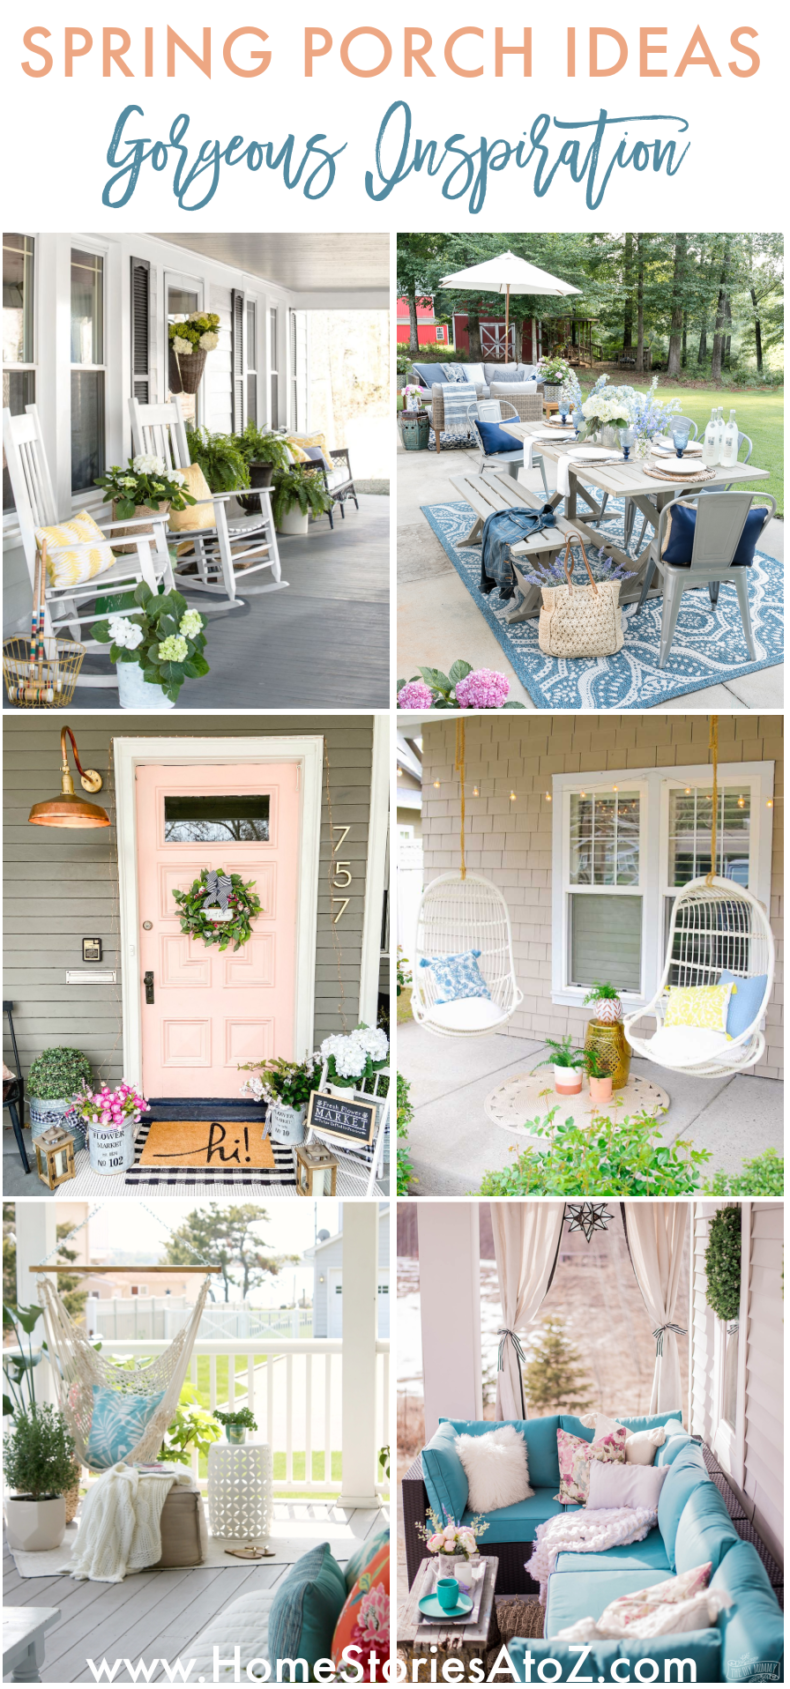 Spring Porch and Patio Ideas - Gorgeous Inspiration for Spring